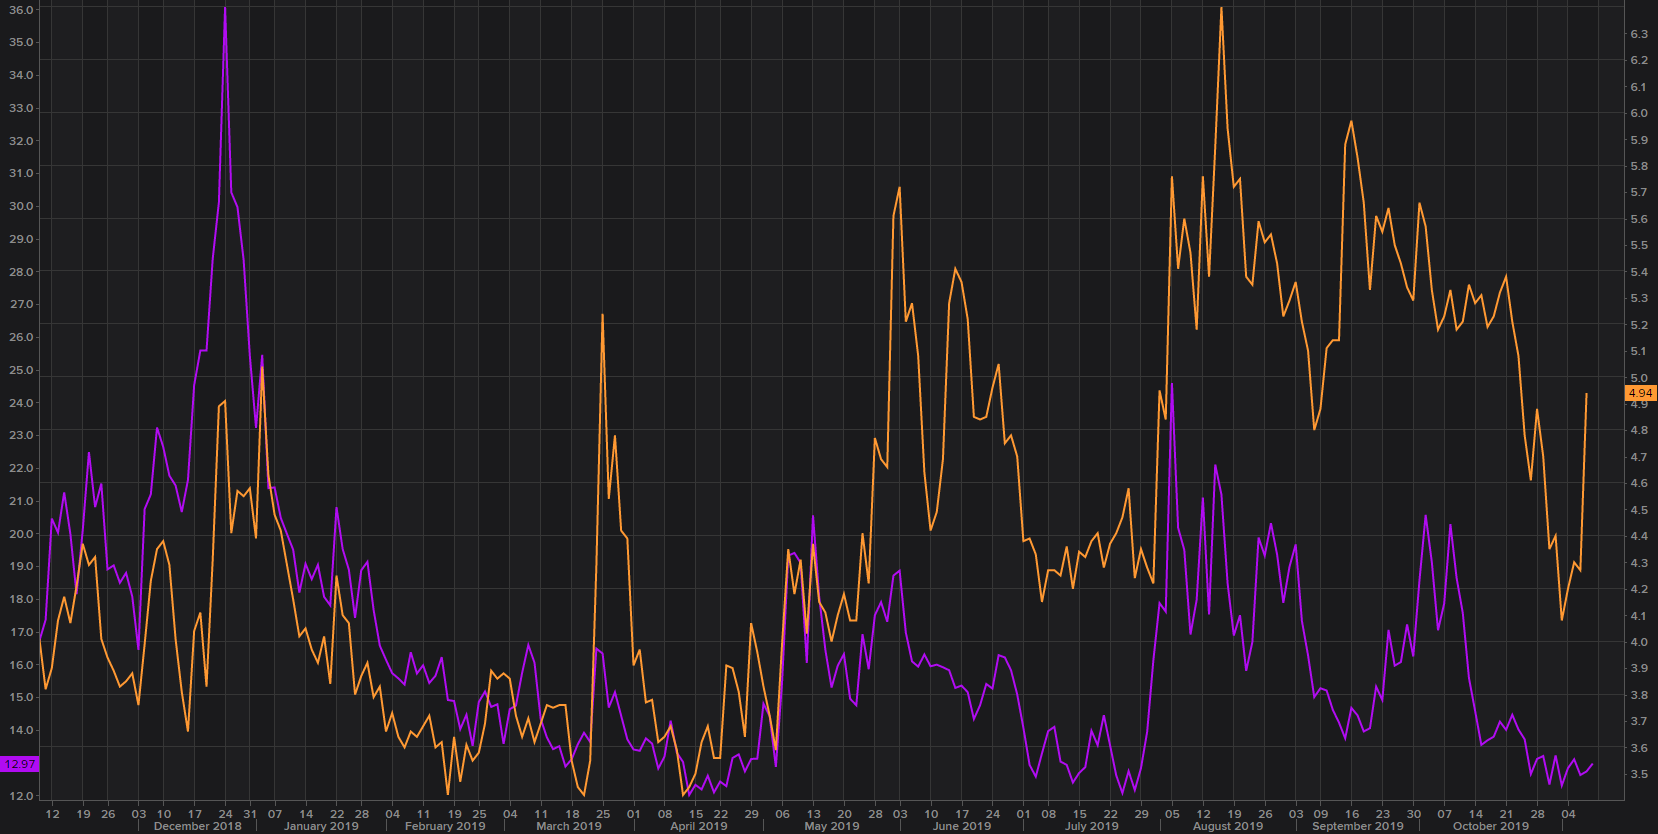 Who cares about bonds (3)? We have not had exploding volatility in bonds and VIX not reacting (at times with a lag)